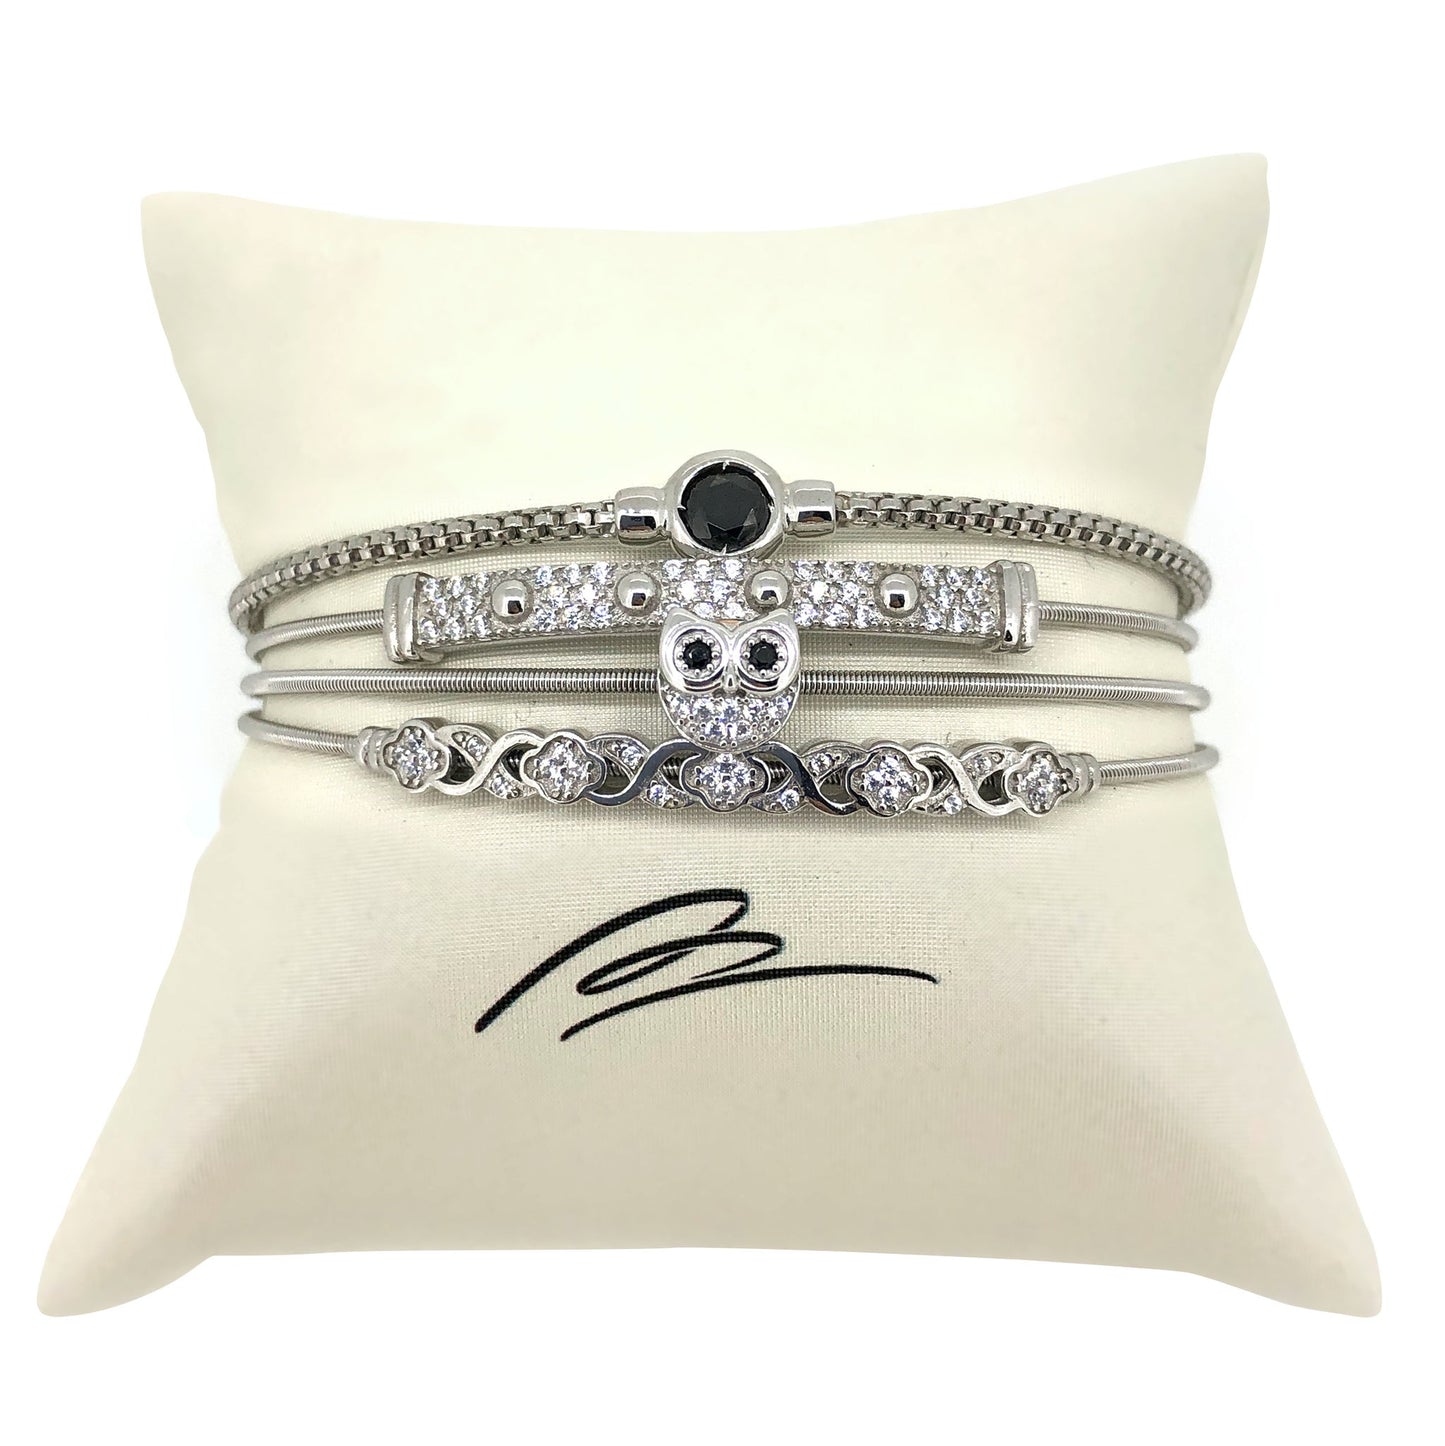 A flexible cable circle accent bracelet with simulated diamonds displayed on a neutral white background.